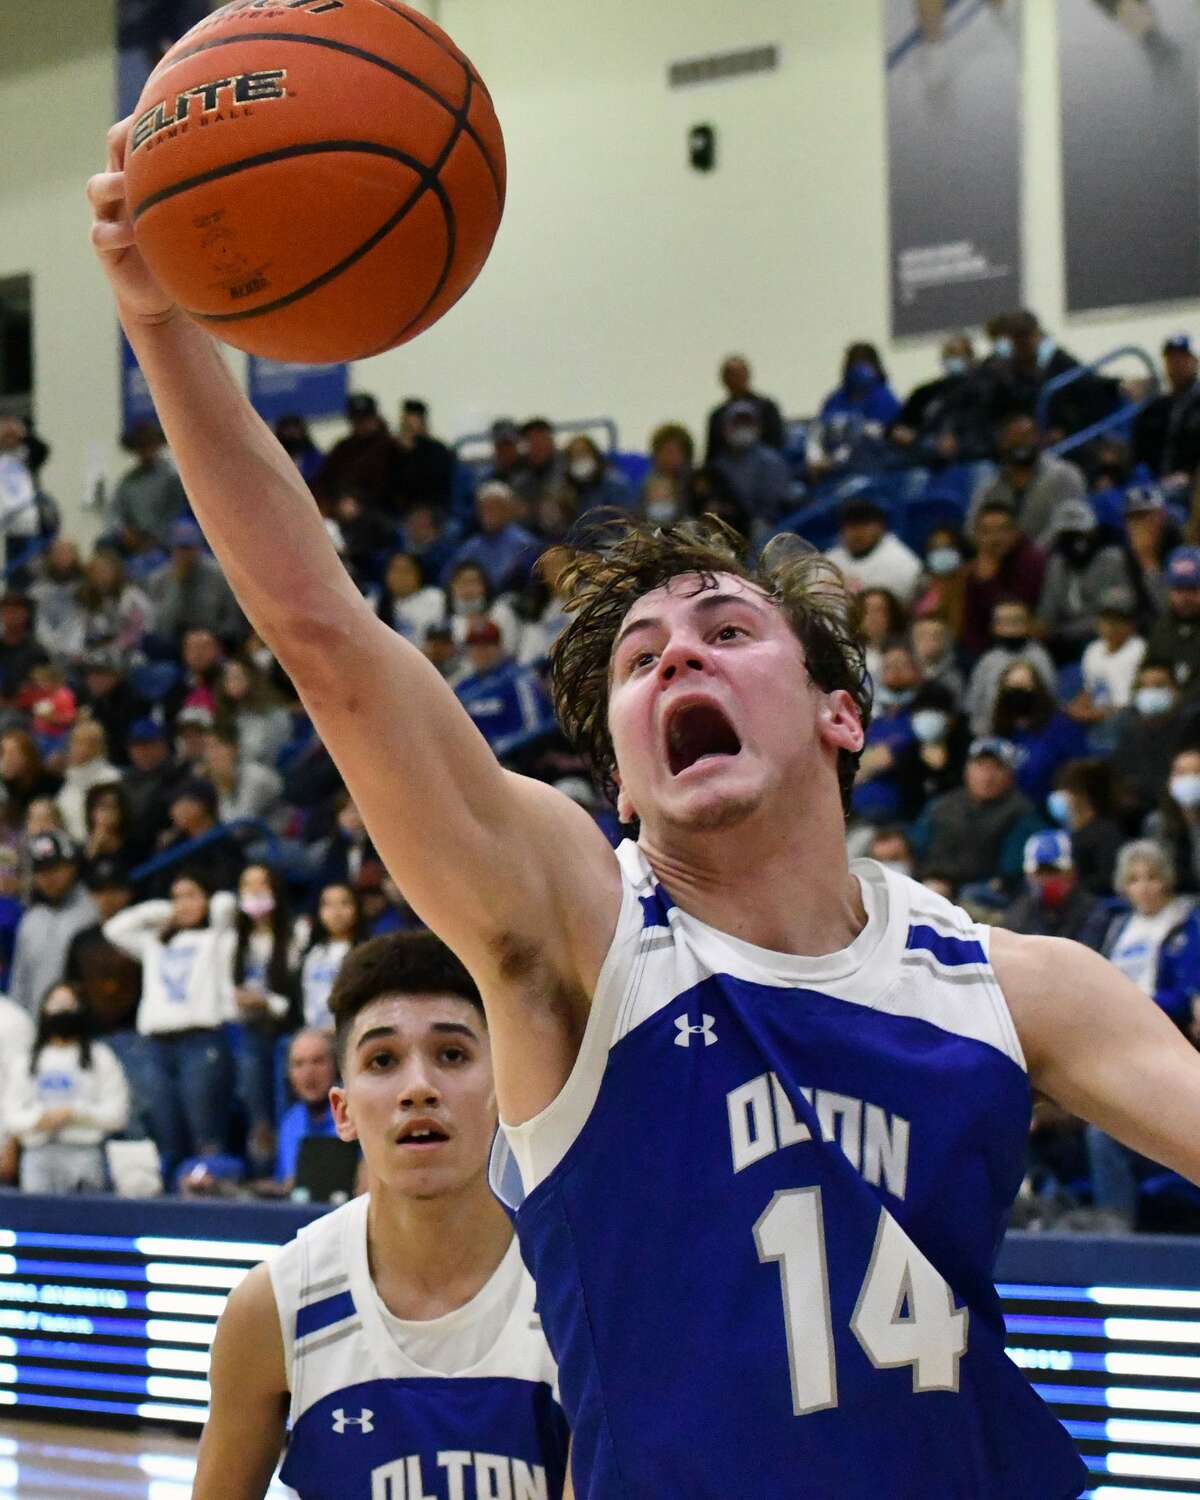 Olton suffered a 57-54 loss to Ralls in the bi-district round of the Class 2A boys basketball playoffs on Friday in the Rip Griffin Center at Lubbock Christian University.